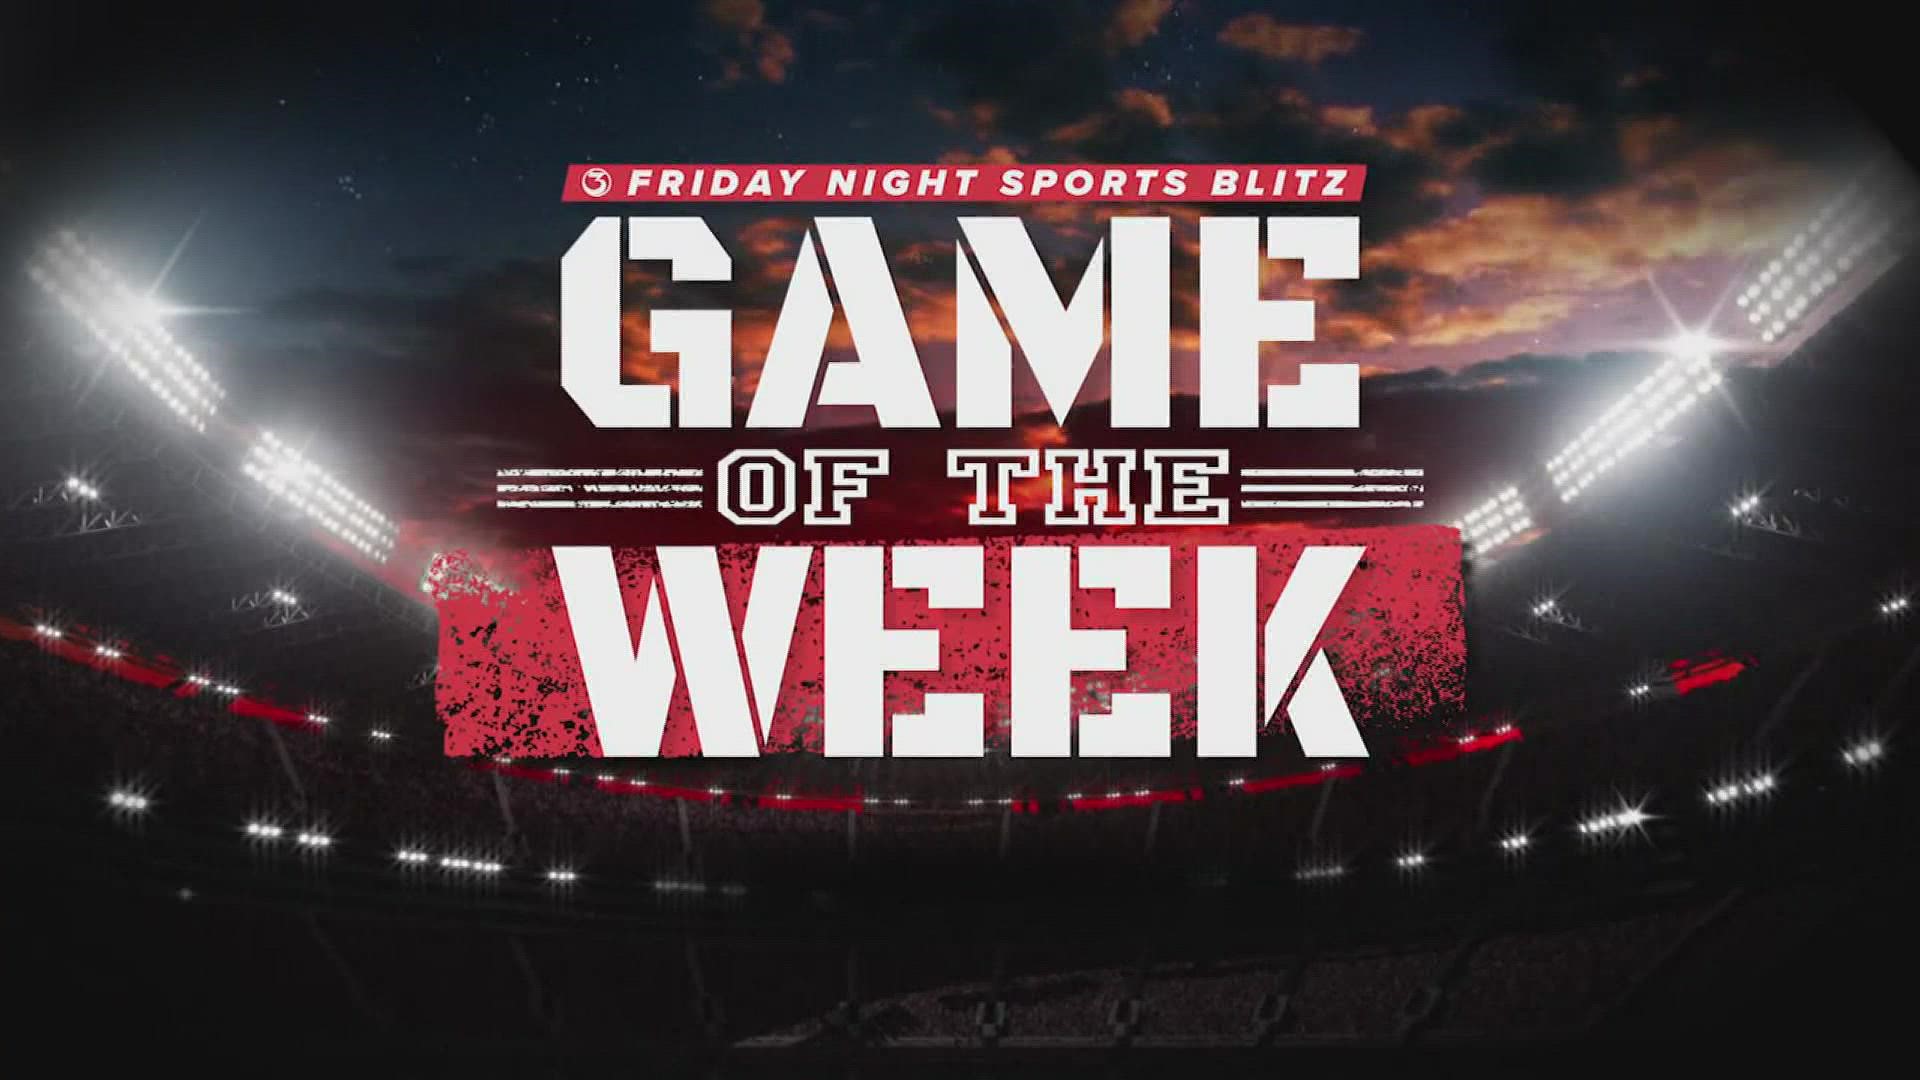 Friday Night Sports Blitz Week 8: Scores and Highlights, pt. 1